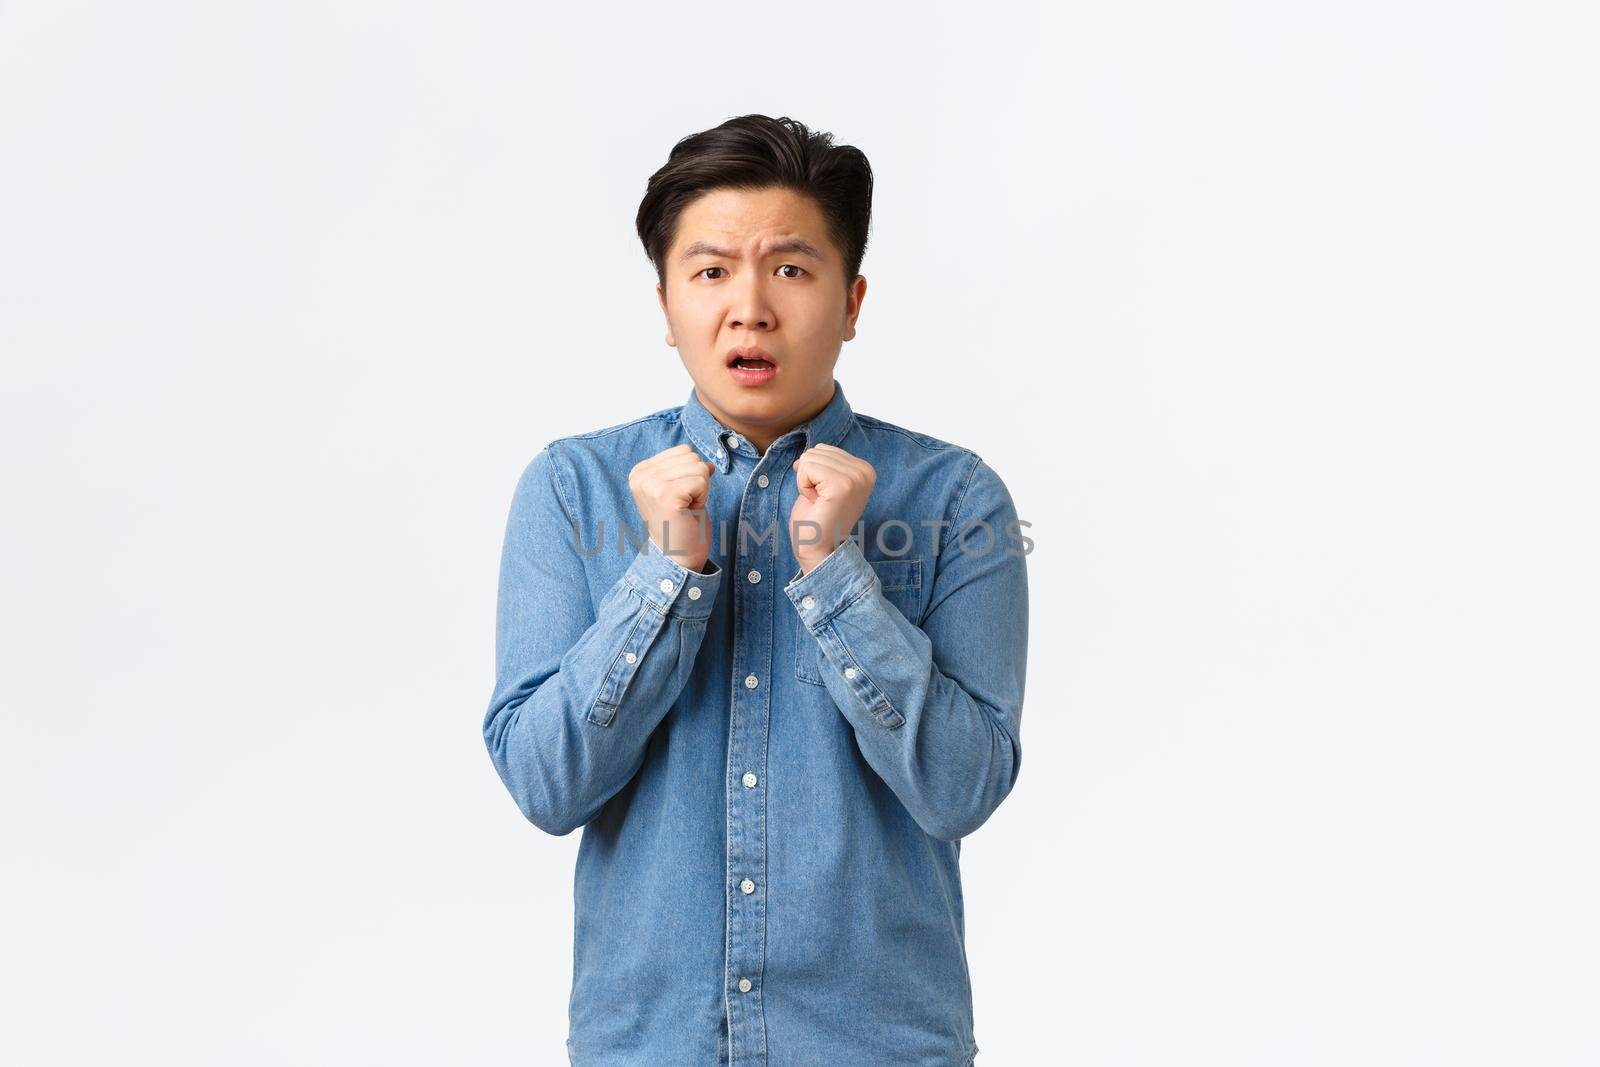 Portrait of timid and insecure young asian man feeling cornered or scared, holding hands tight to chest, shivering fear, looking anxious at camera, standing frightened over white background.